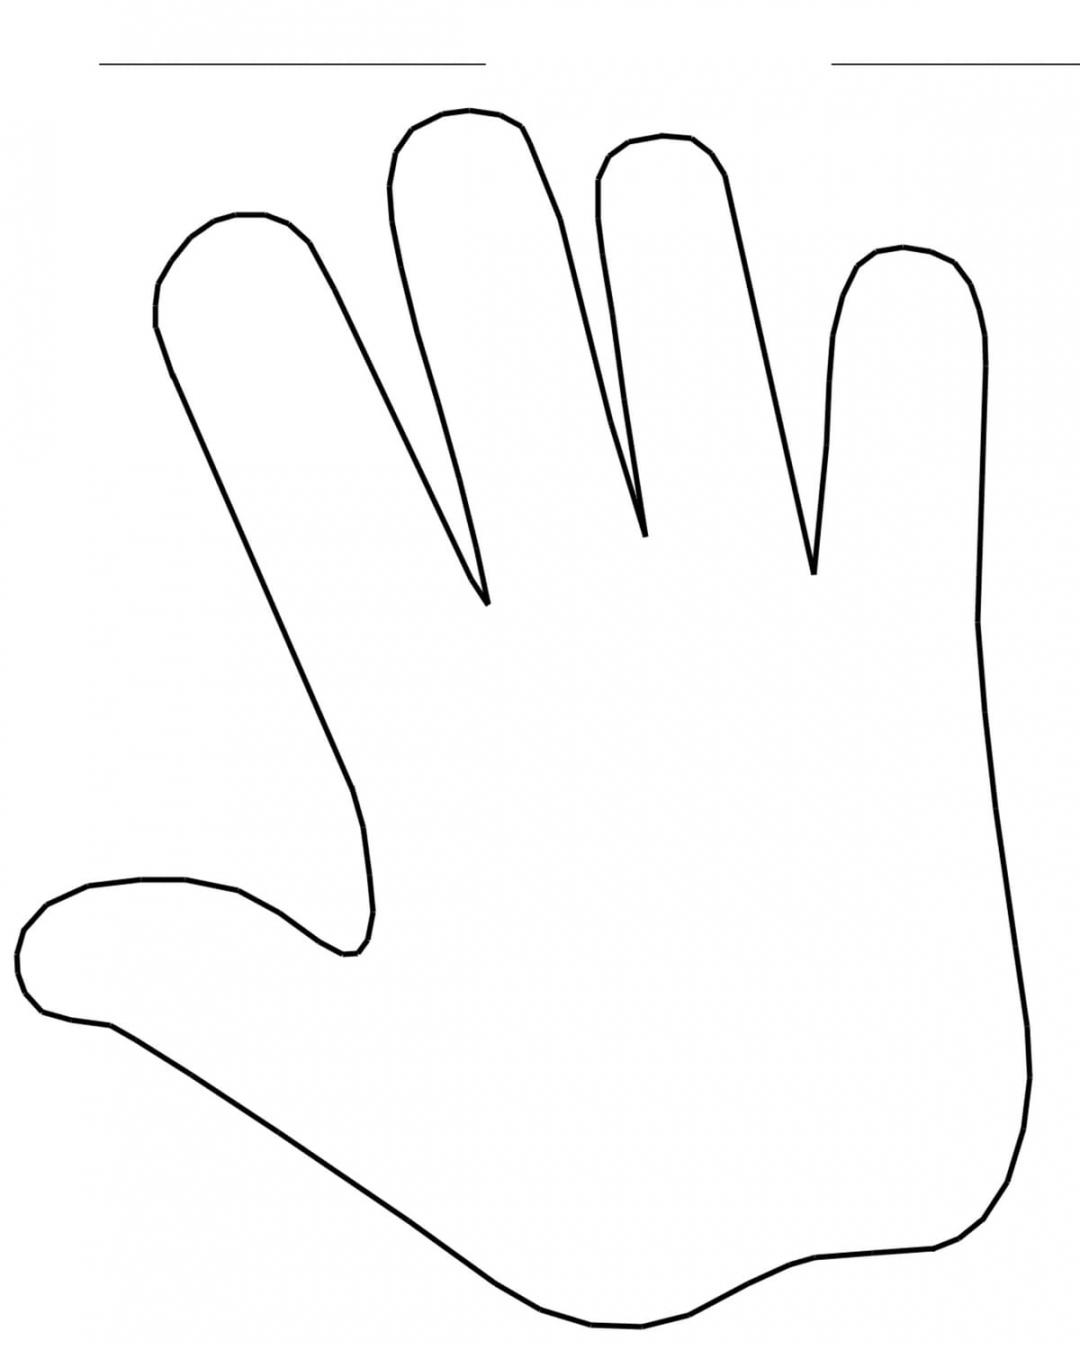 Hand Template For Kids - Printable Coloring Pages - FREE Printables - Hand Cut Out Printable